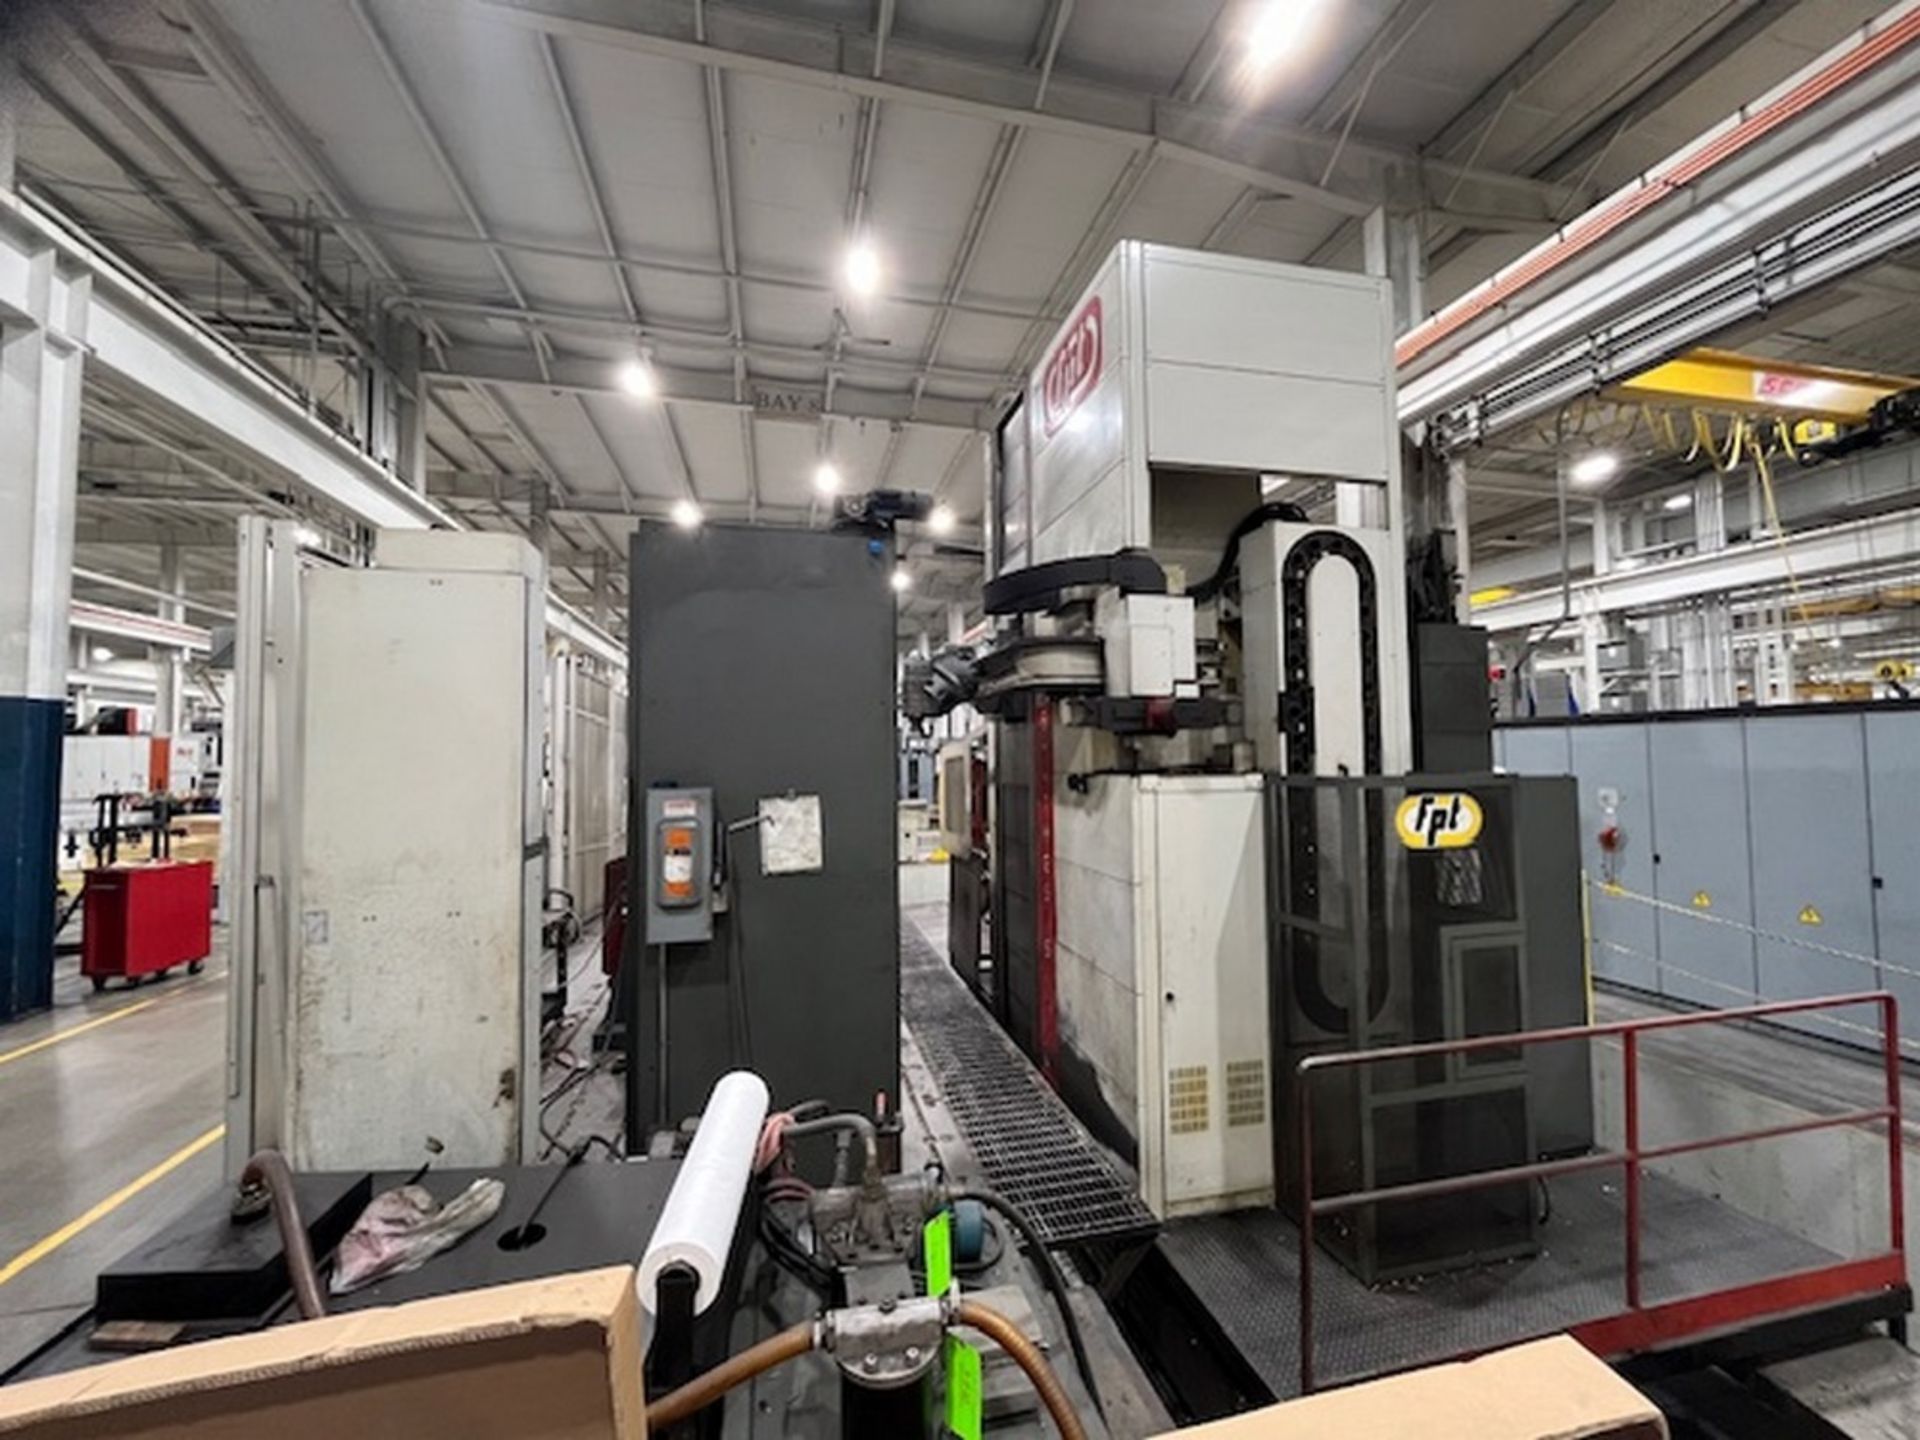 FPT Synthesis Multi Axis Horizontal Machining Center, 336' Floot Table Length, 240" X Travel, 118" Y